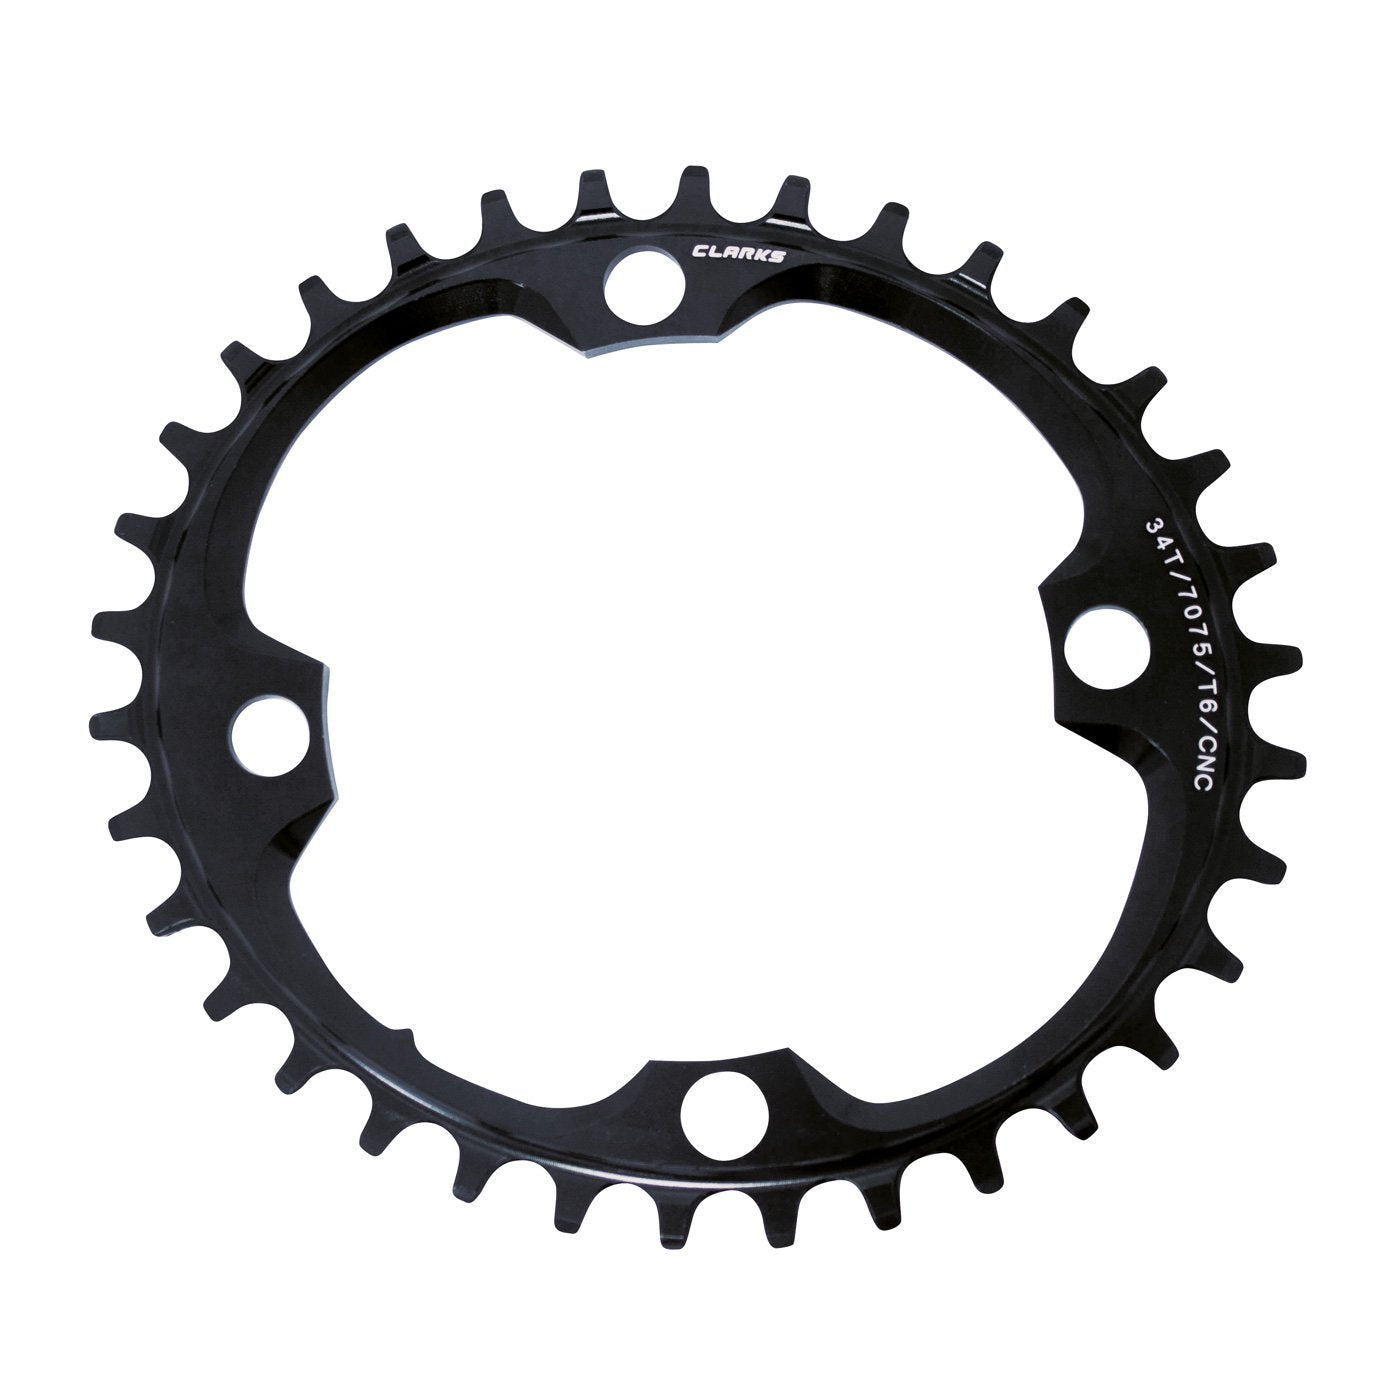 View Clarks MTB Oval Chainring CNC 7075 T6 Alloy 104BCD Narrow Wide 32t information